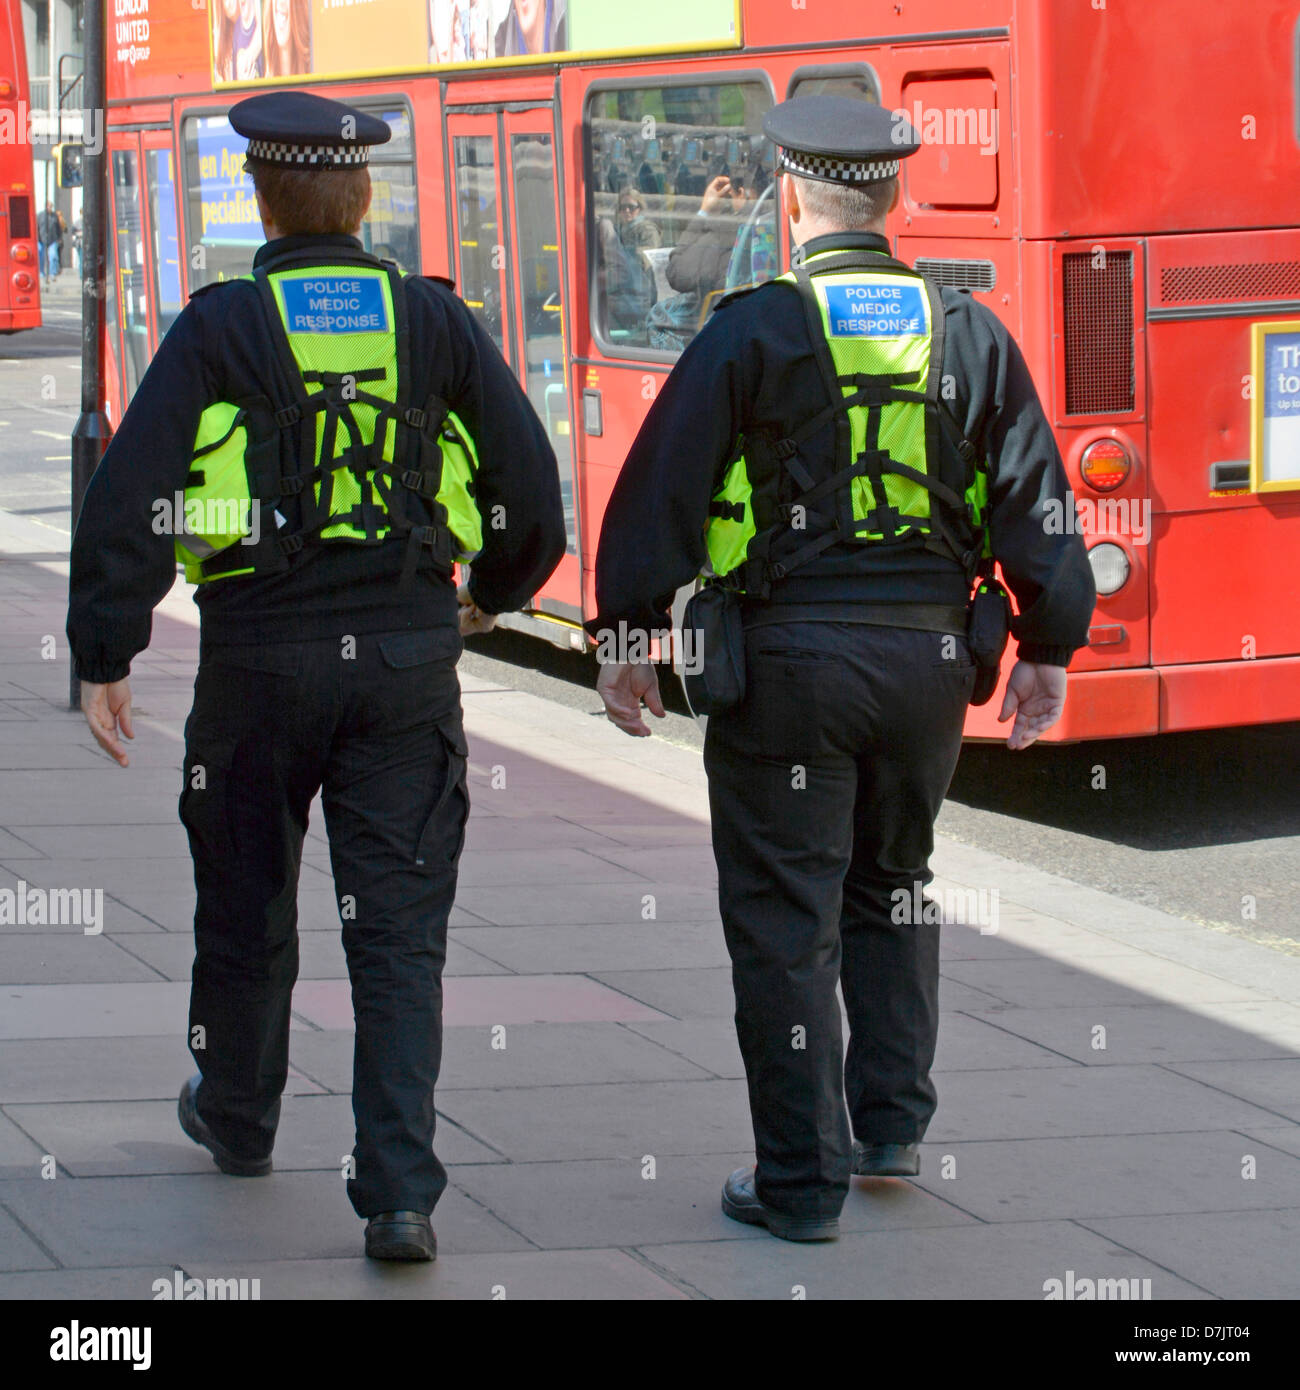 Close up back view of two medic response police officers in uniform back packs on Metropolitan policemen on foot patrol West End London England UK Stock Photo